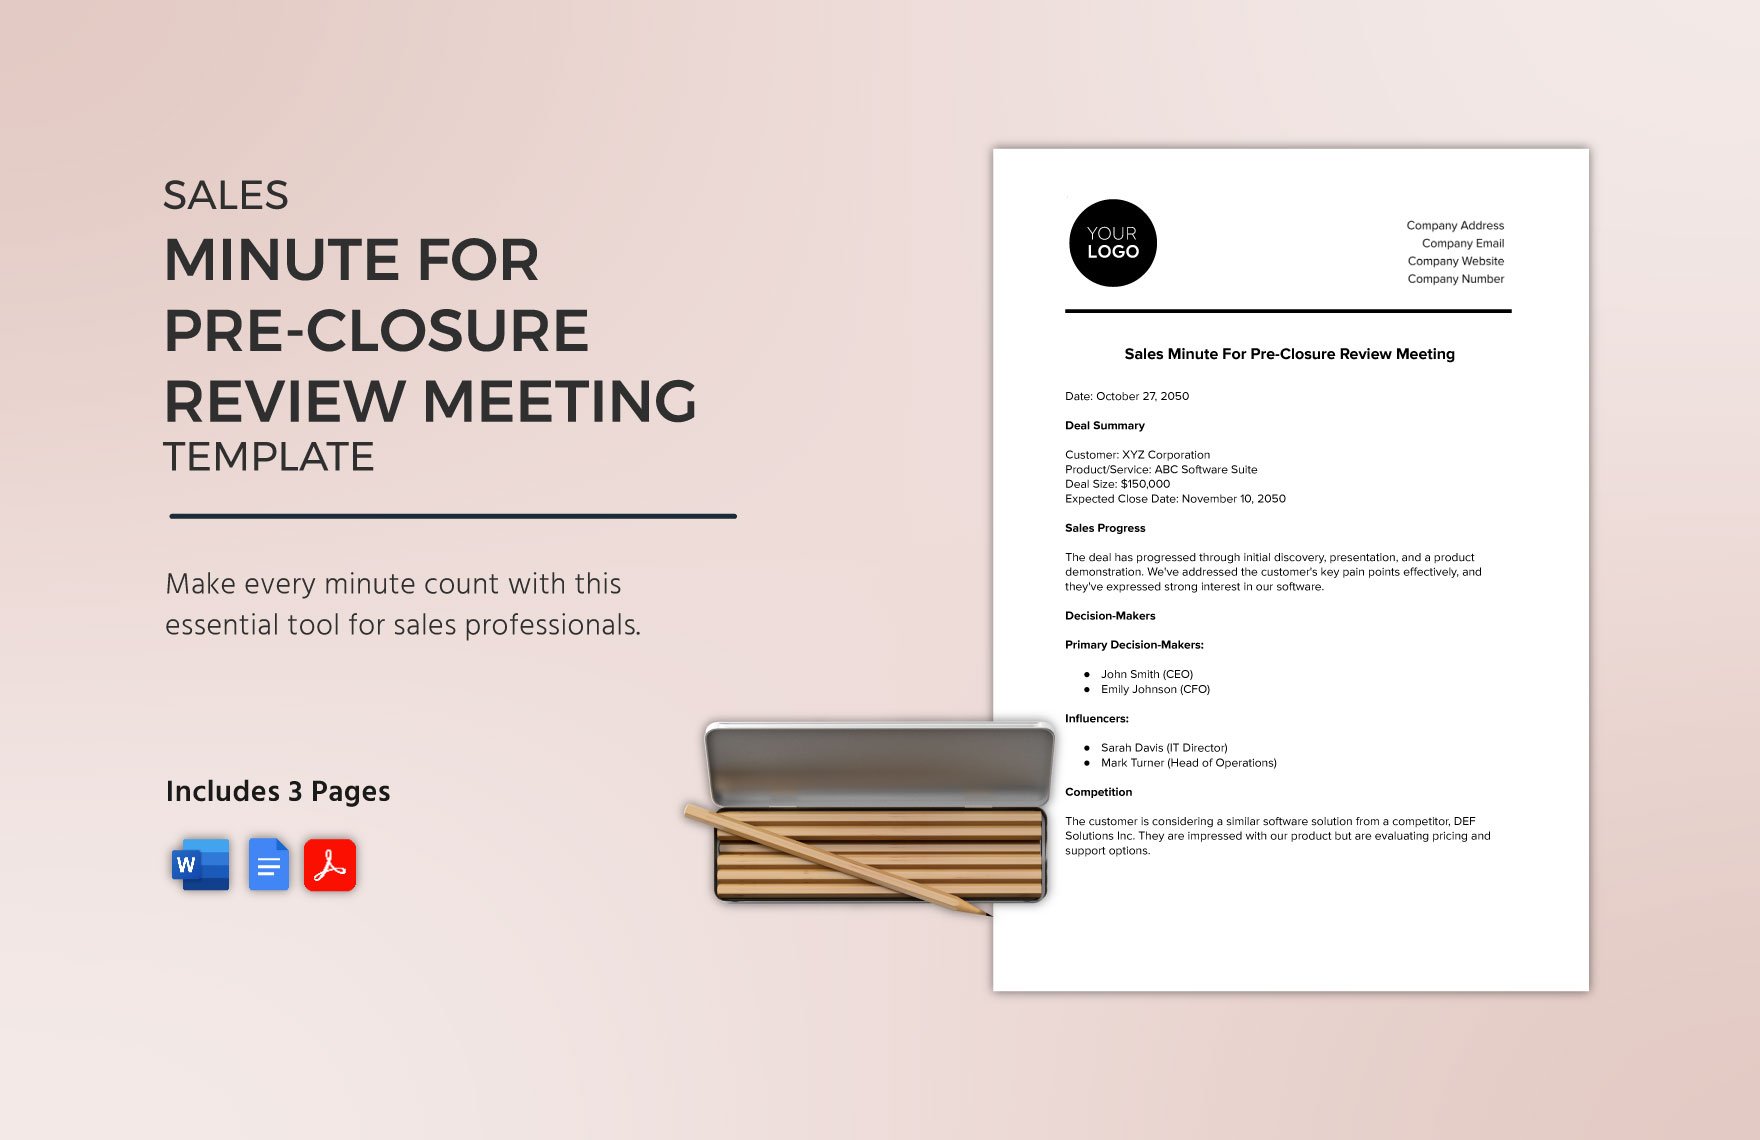 Sales Minute for Pre-Closure Review Meeting Template